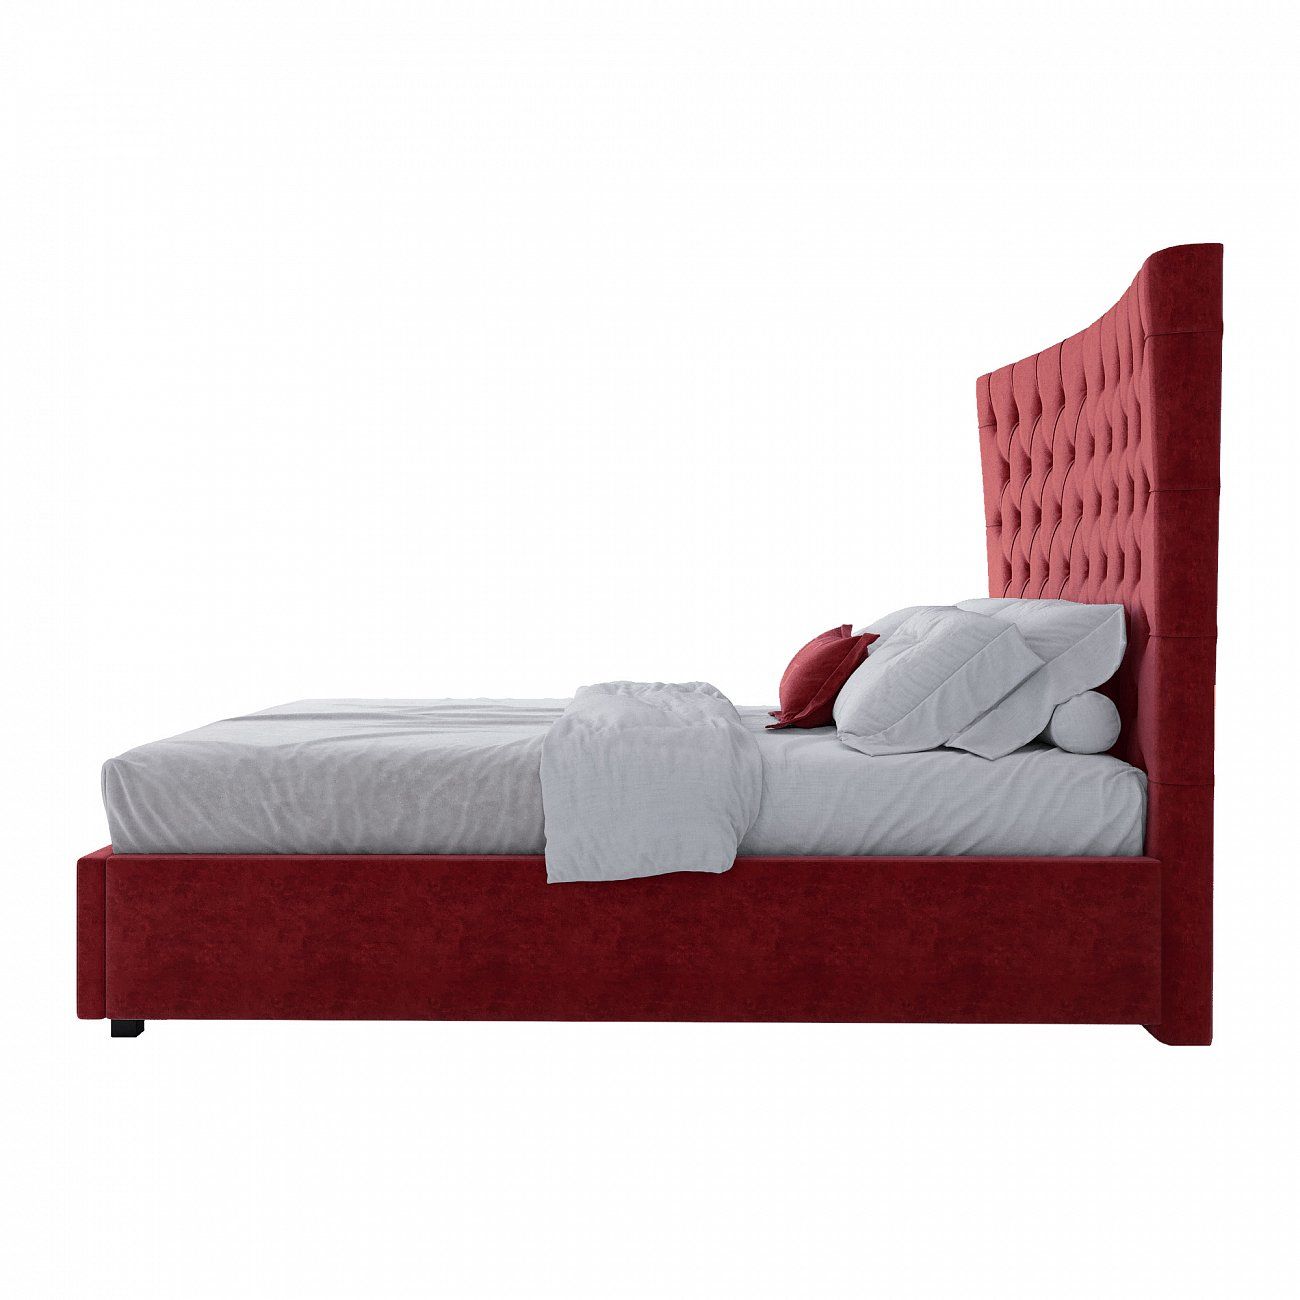 Teenage bed with carriage screed 140x200 cm red QuickSand